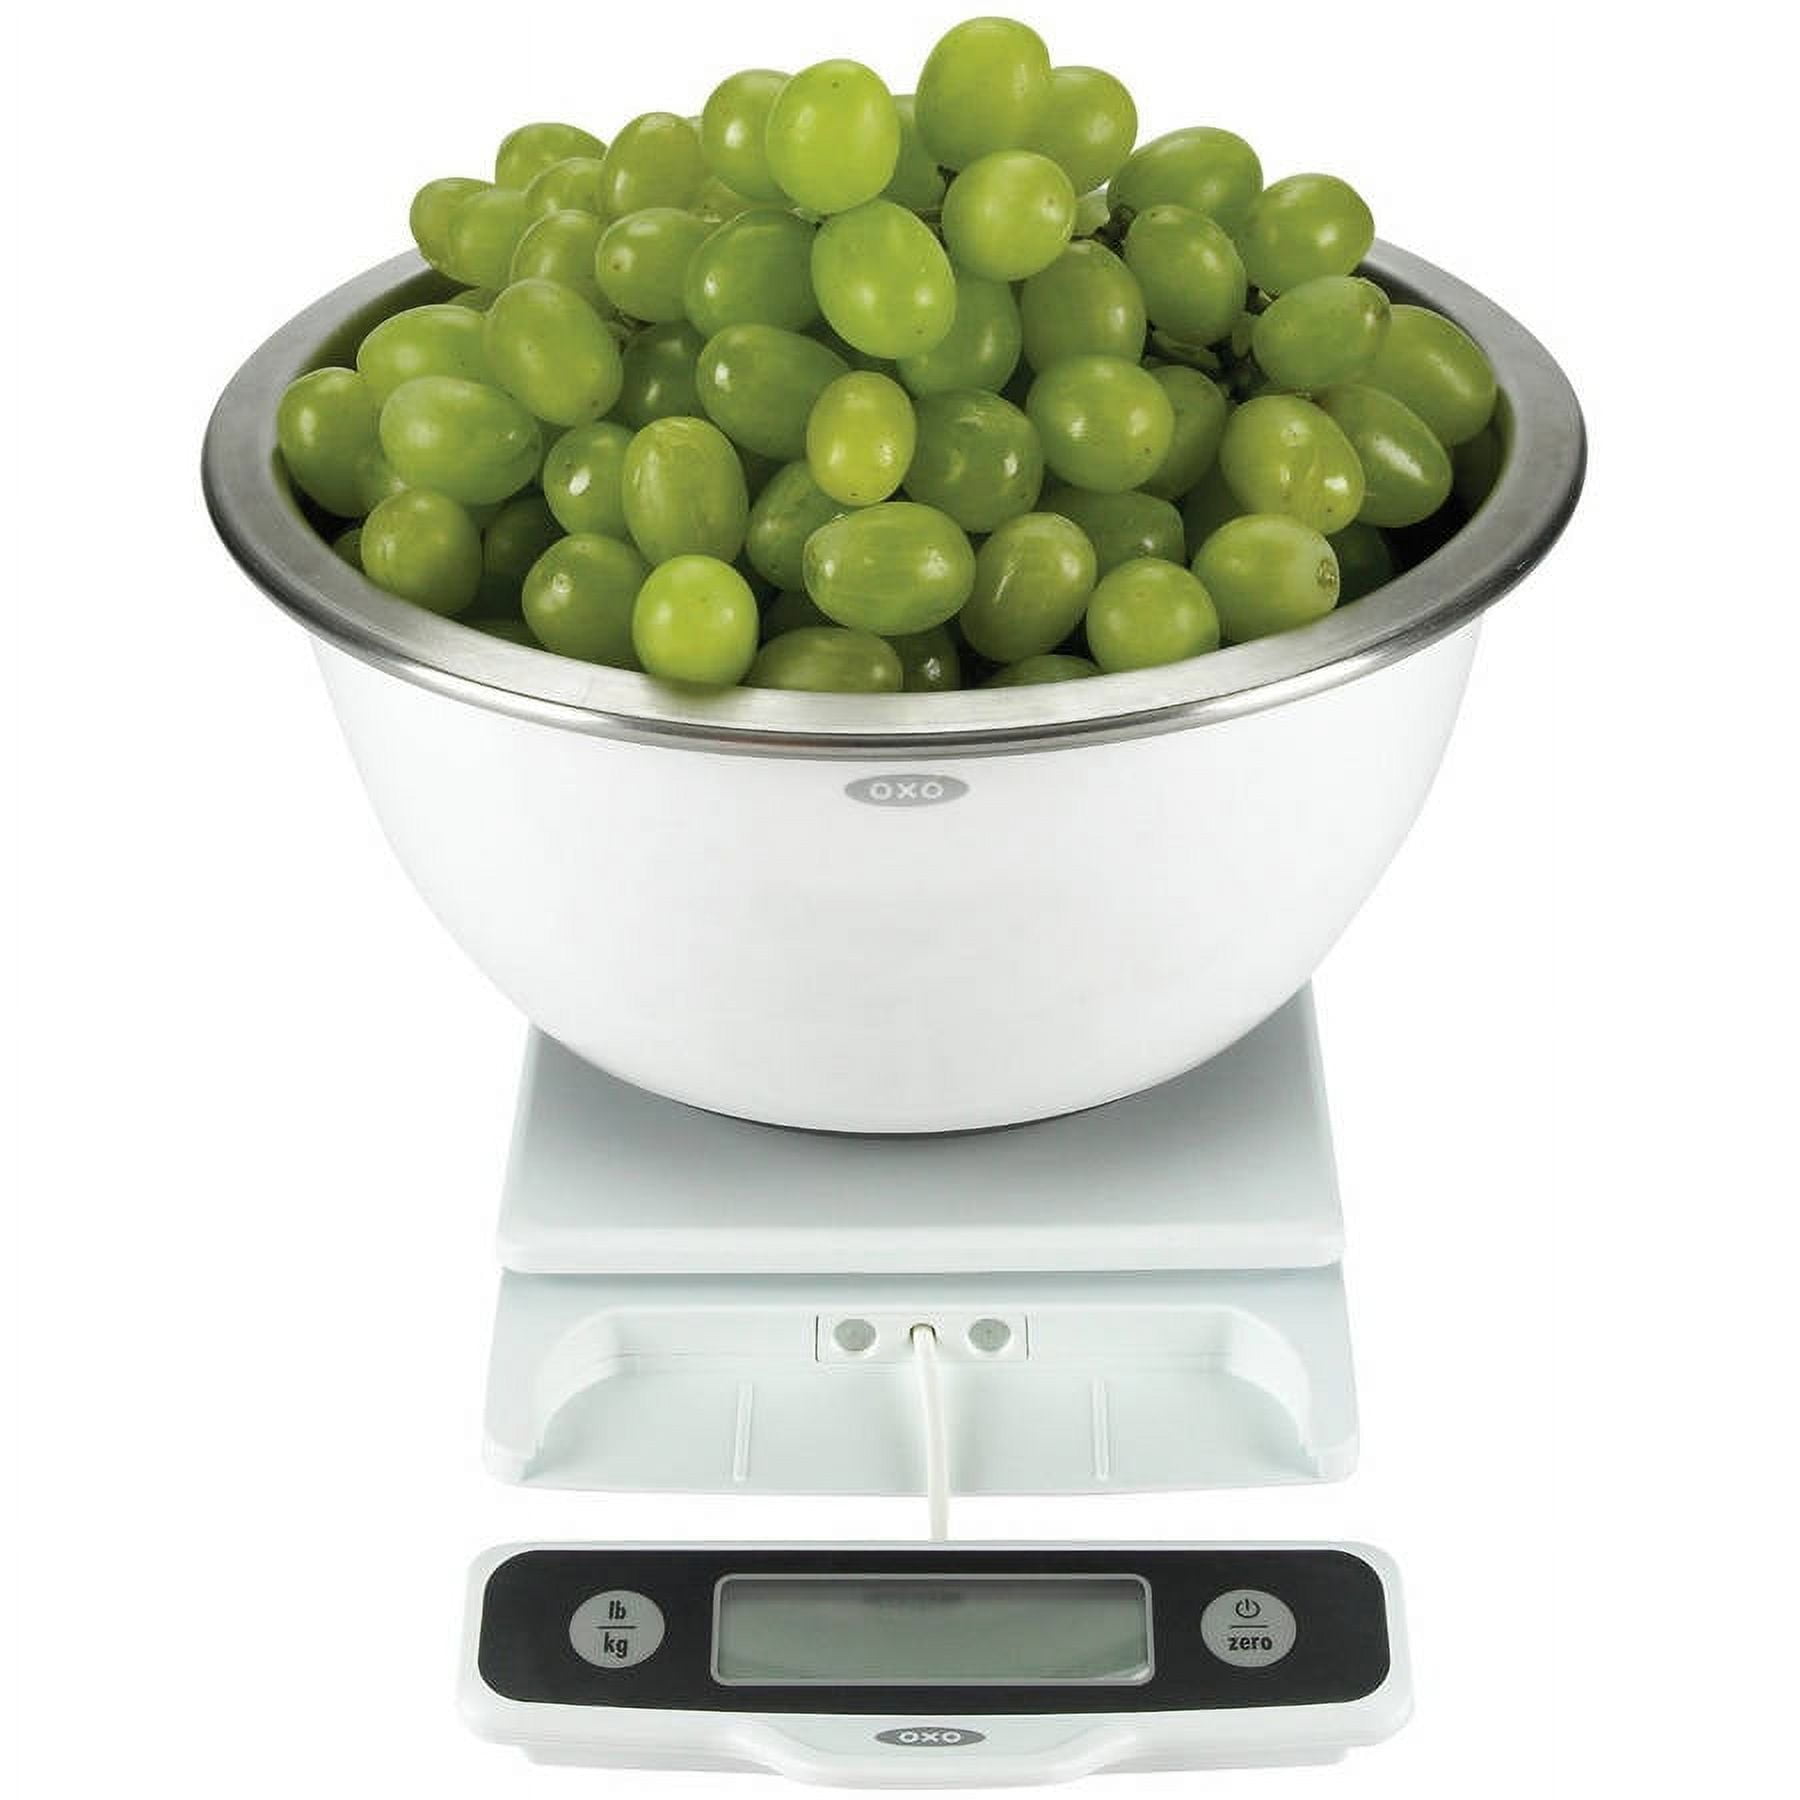 Oxo Good Grips 5-pound Food Scale With P 